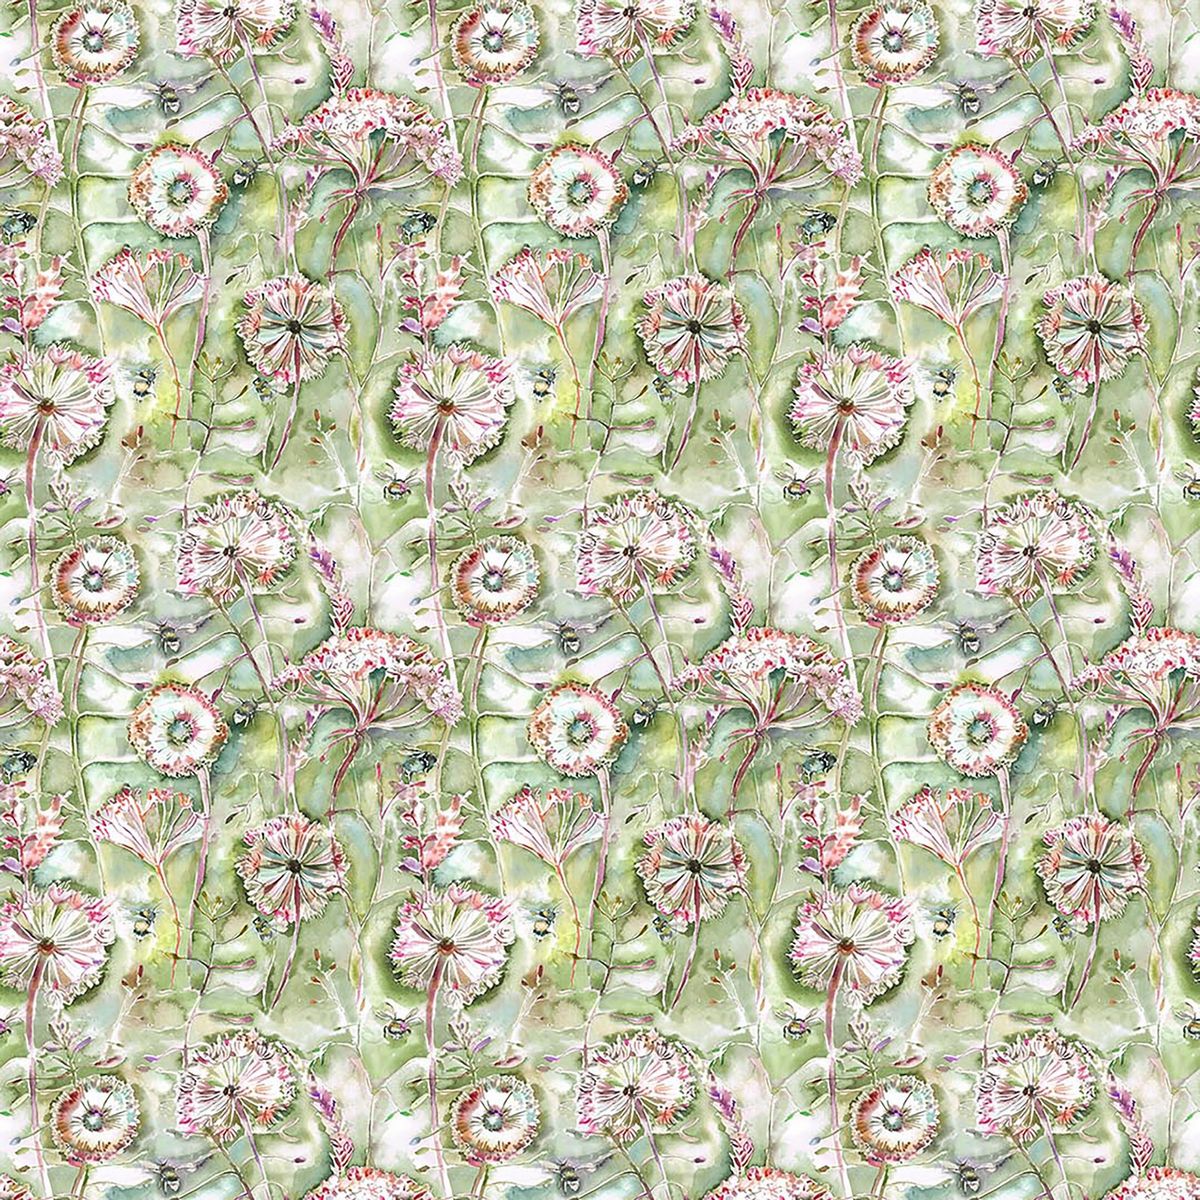 Langdale Sweetpea Fabric by Voyage Maison